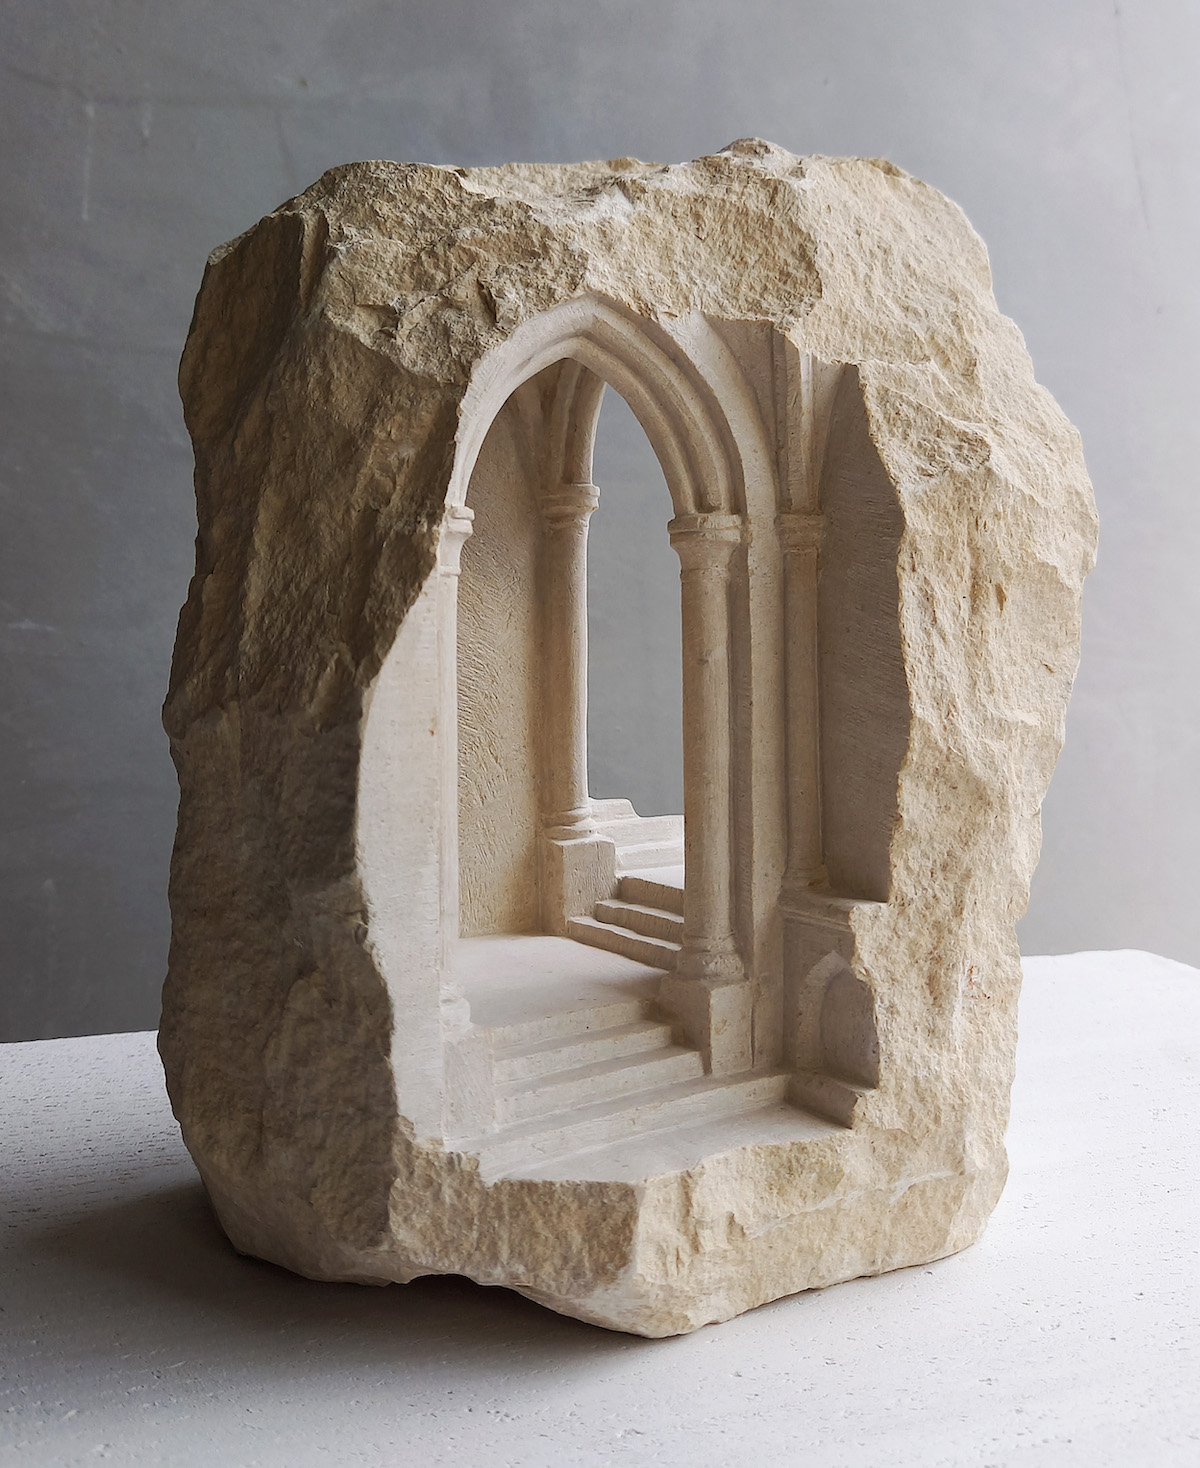 Architectural Carving by Matthew Simonds